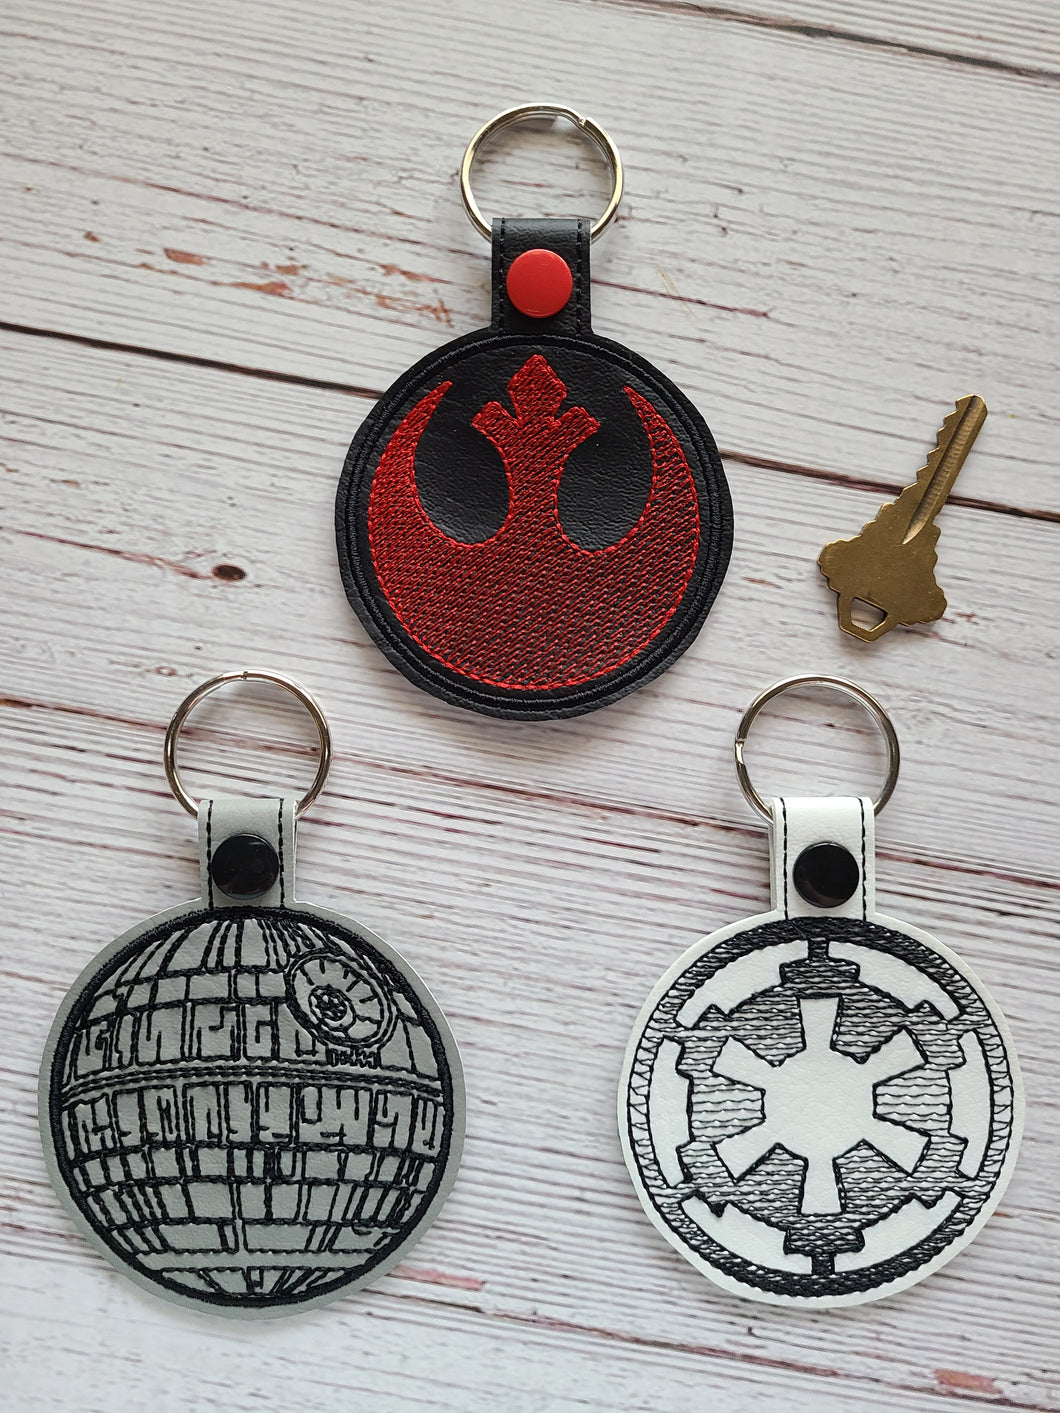 Key Fobs Inspired By Stars - Keychains - Backpack Decoration - Bag Bling